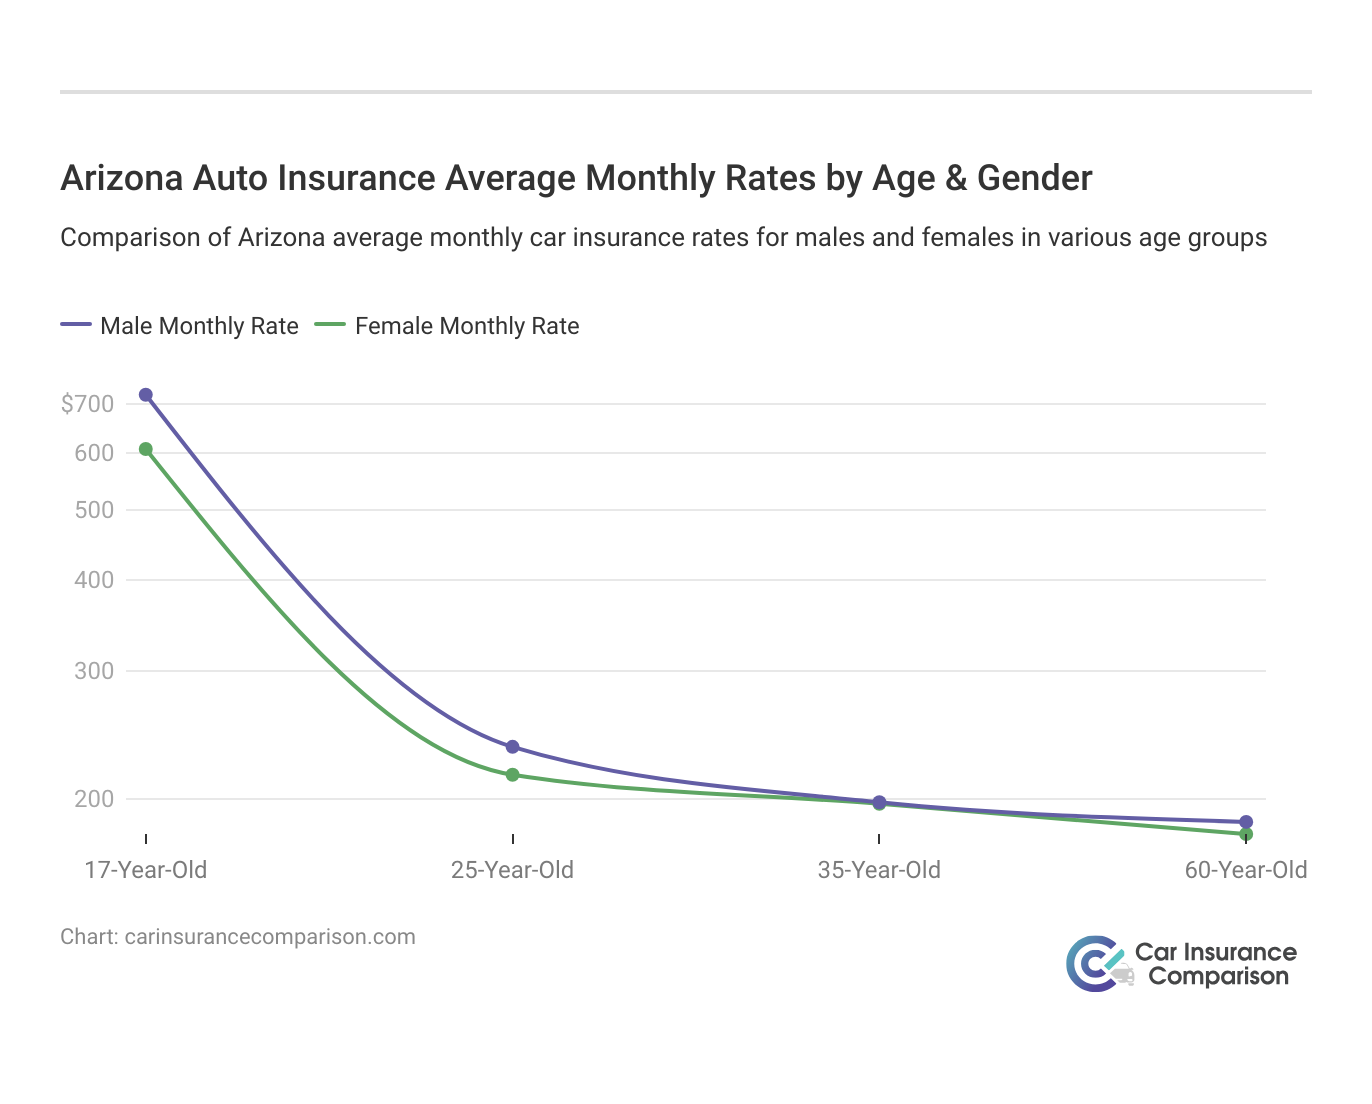 <h3>Arizona Auto Insurance Average Monthly Rates by Age & Gender</h3>